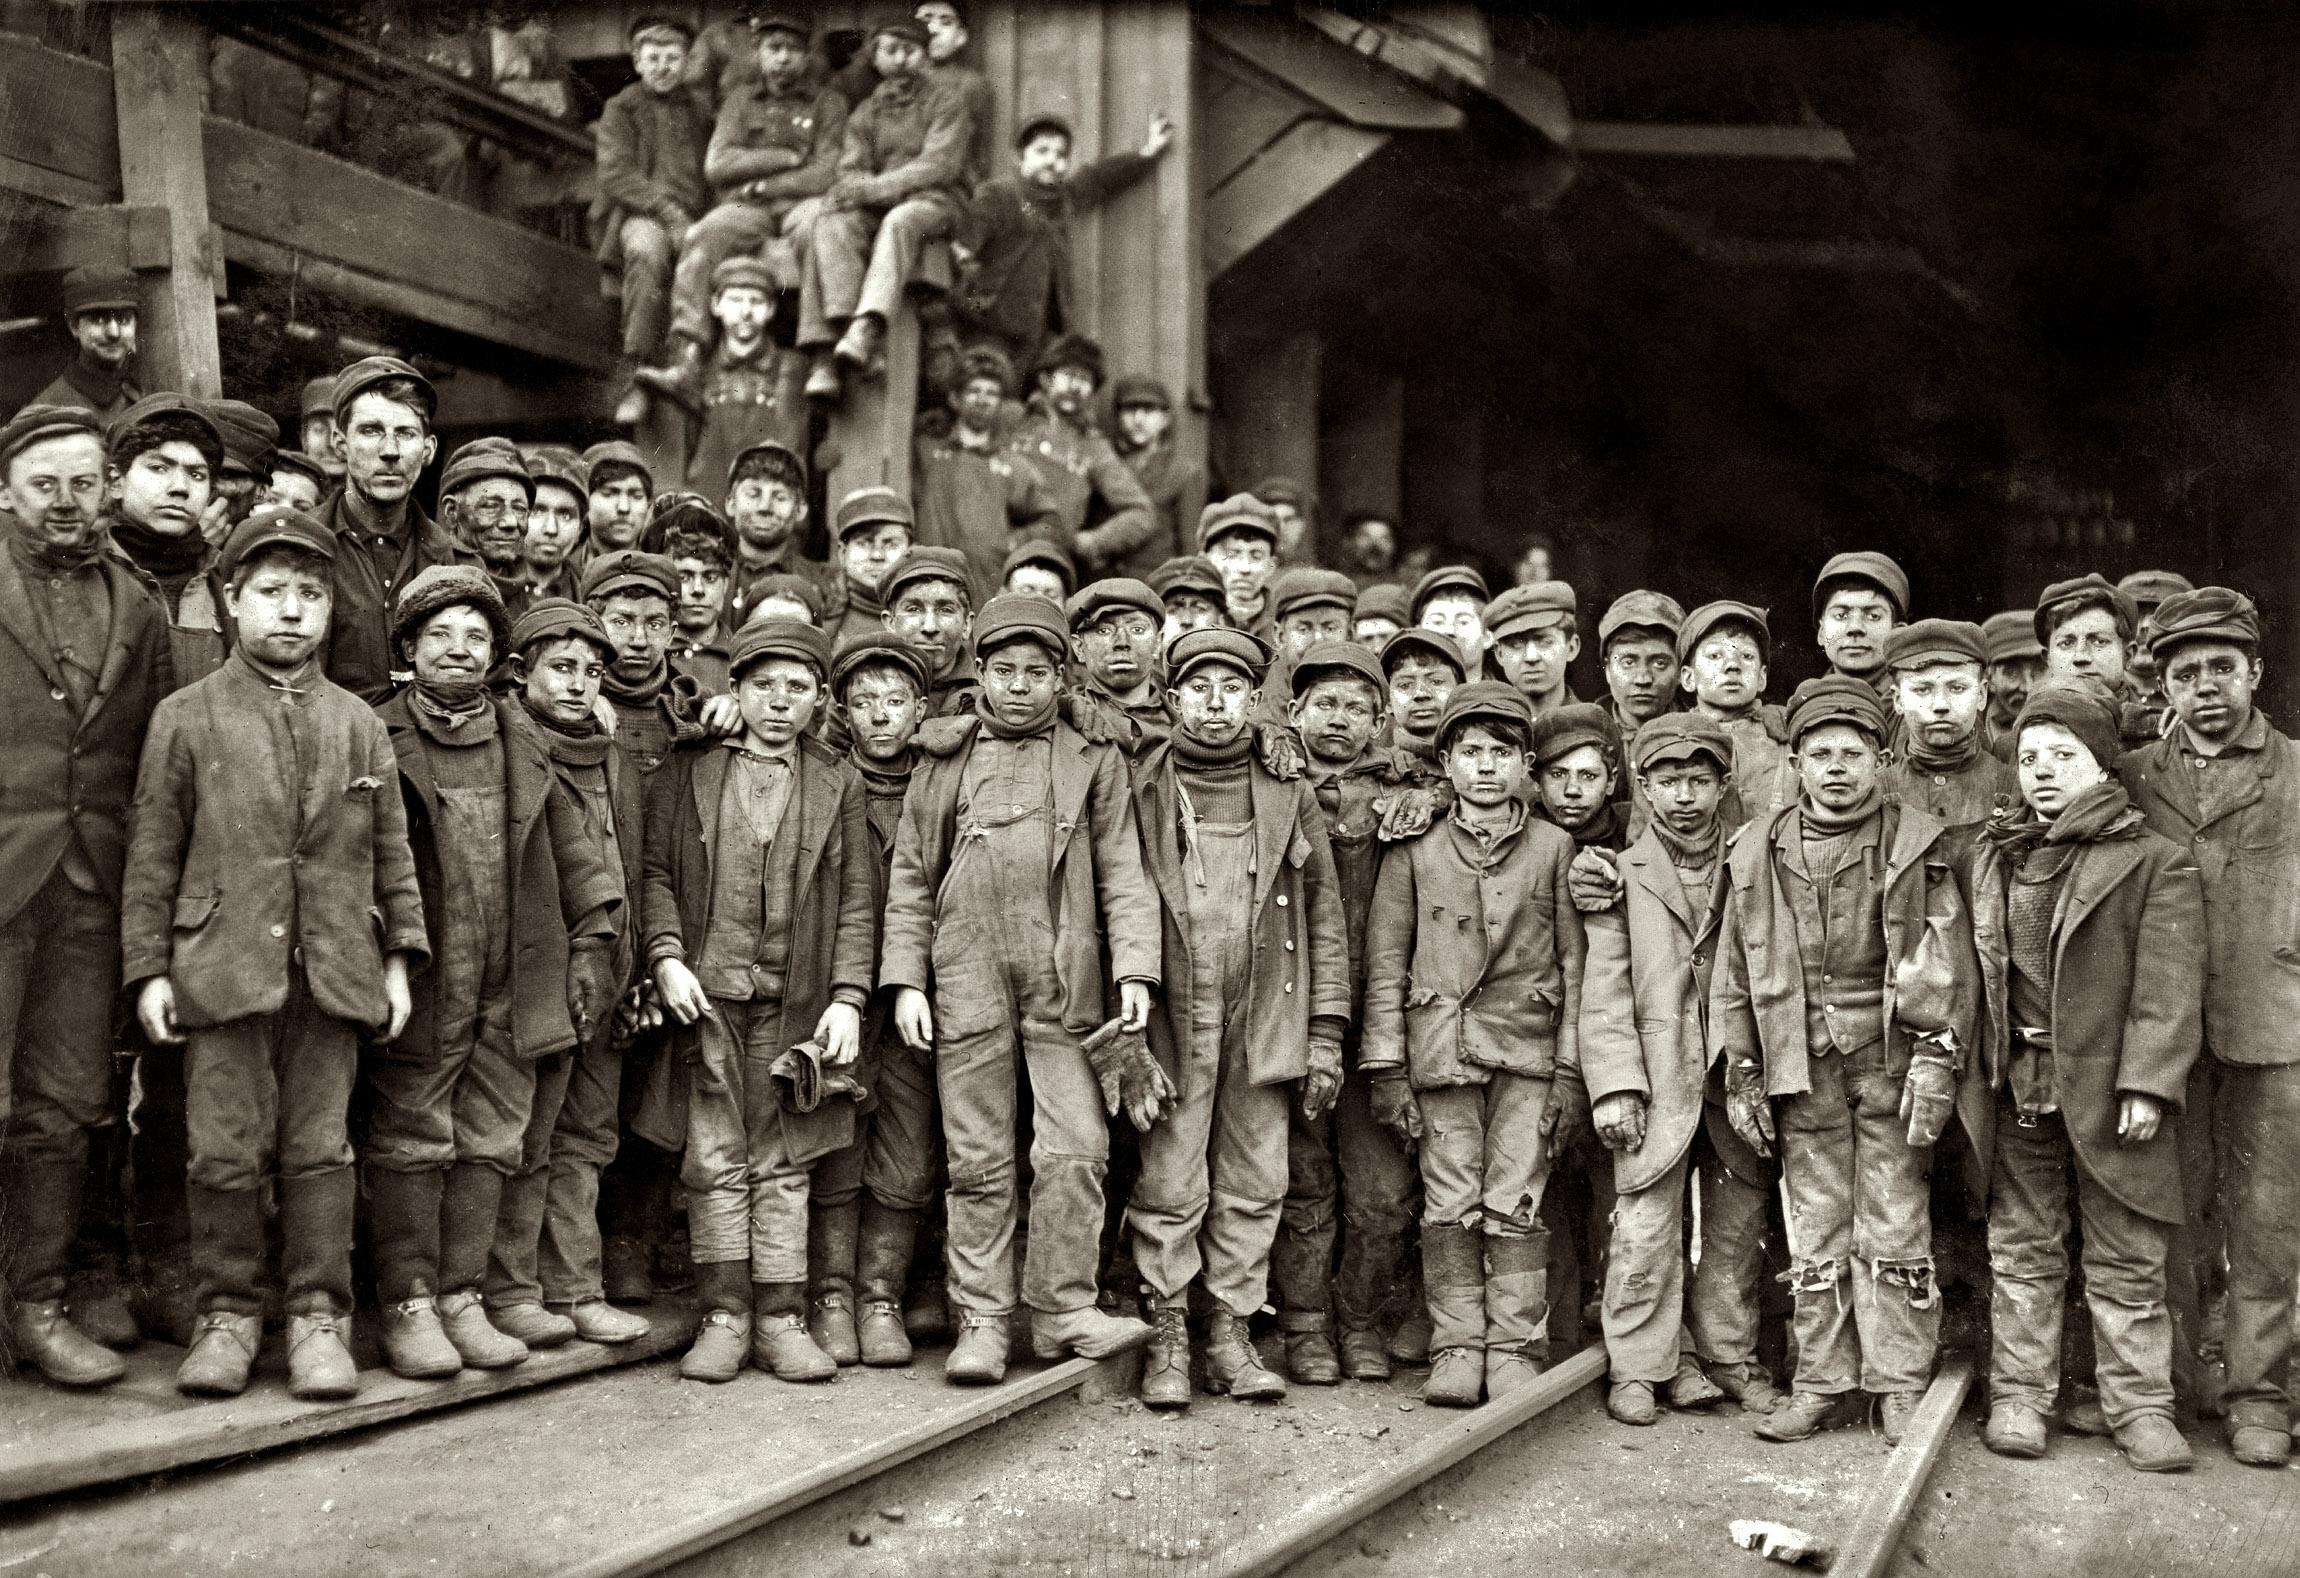 image showing "Breaker boys," most 8–12, who worked 60-hour weeks breaking coal when child labor was permitted